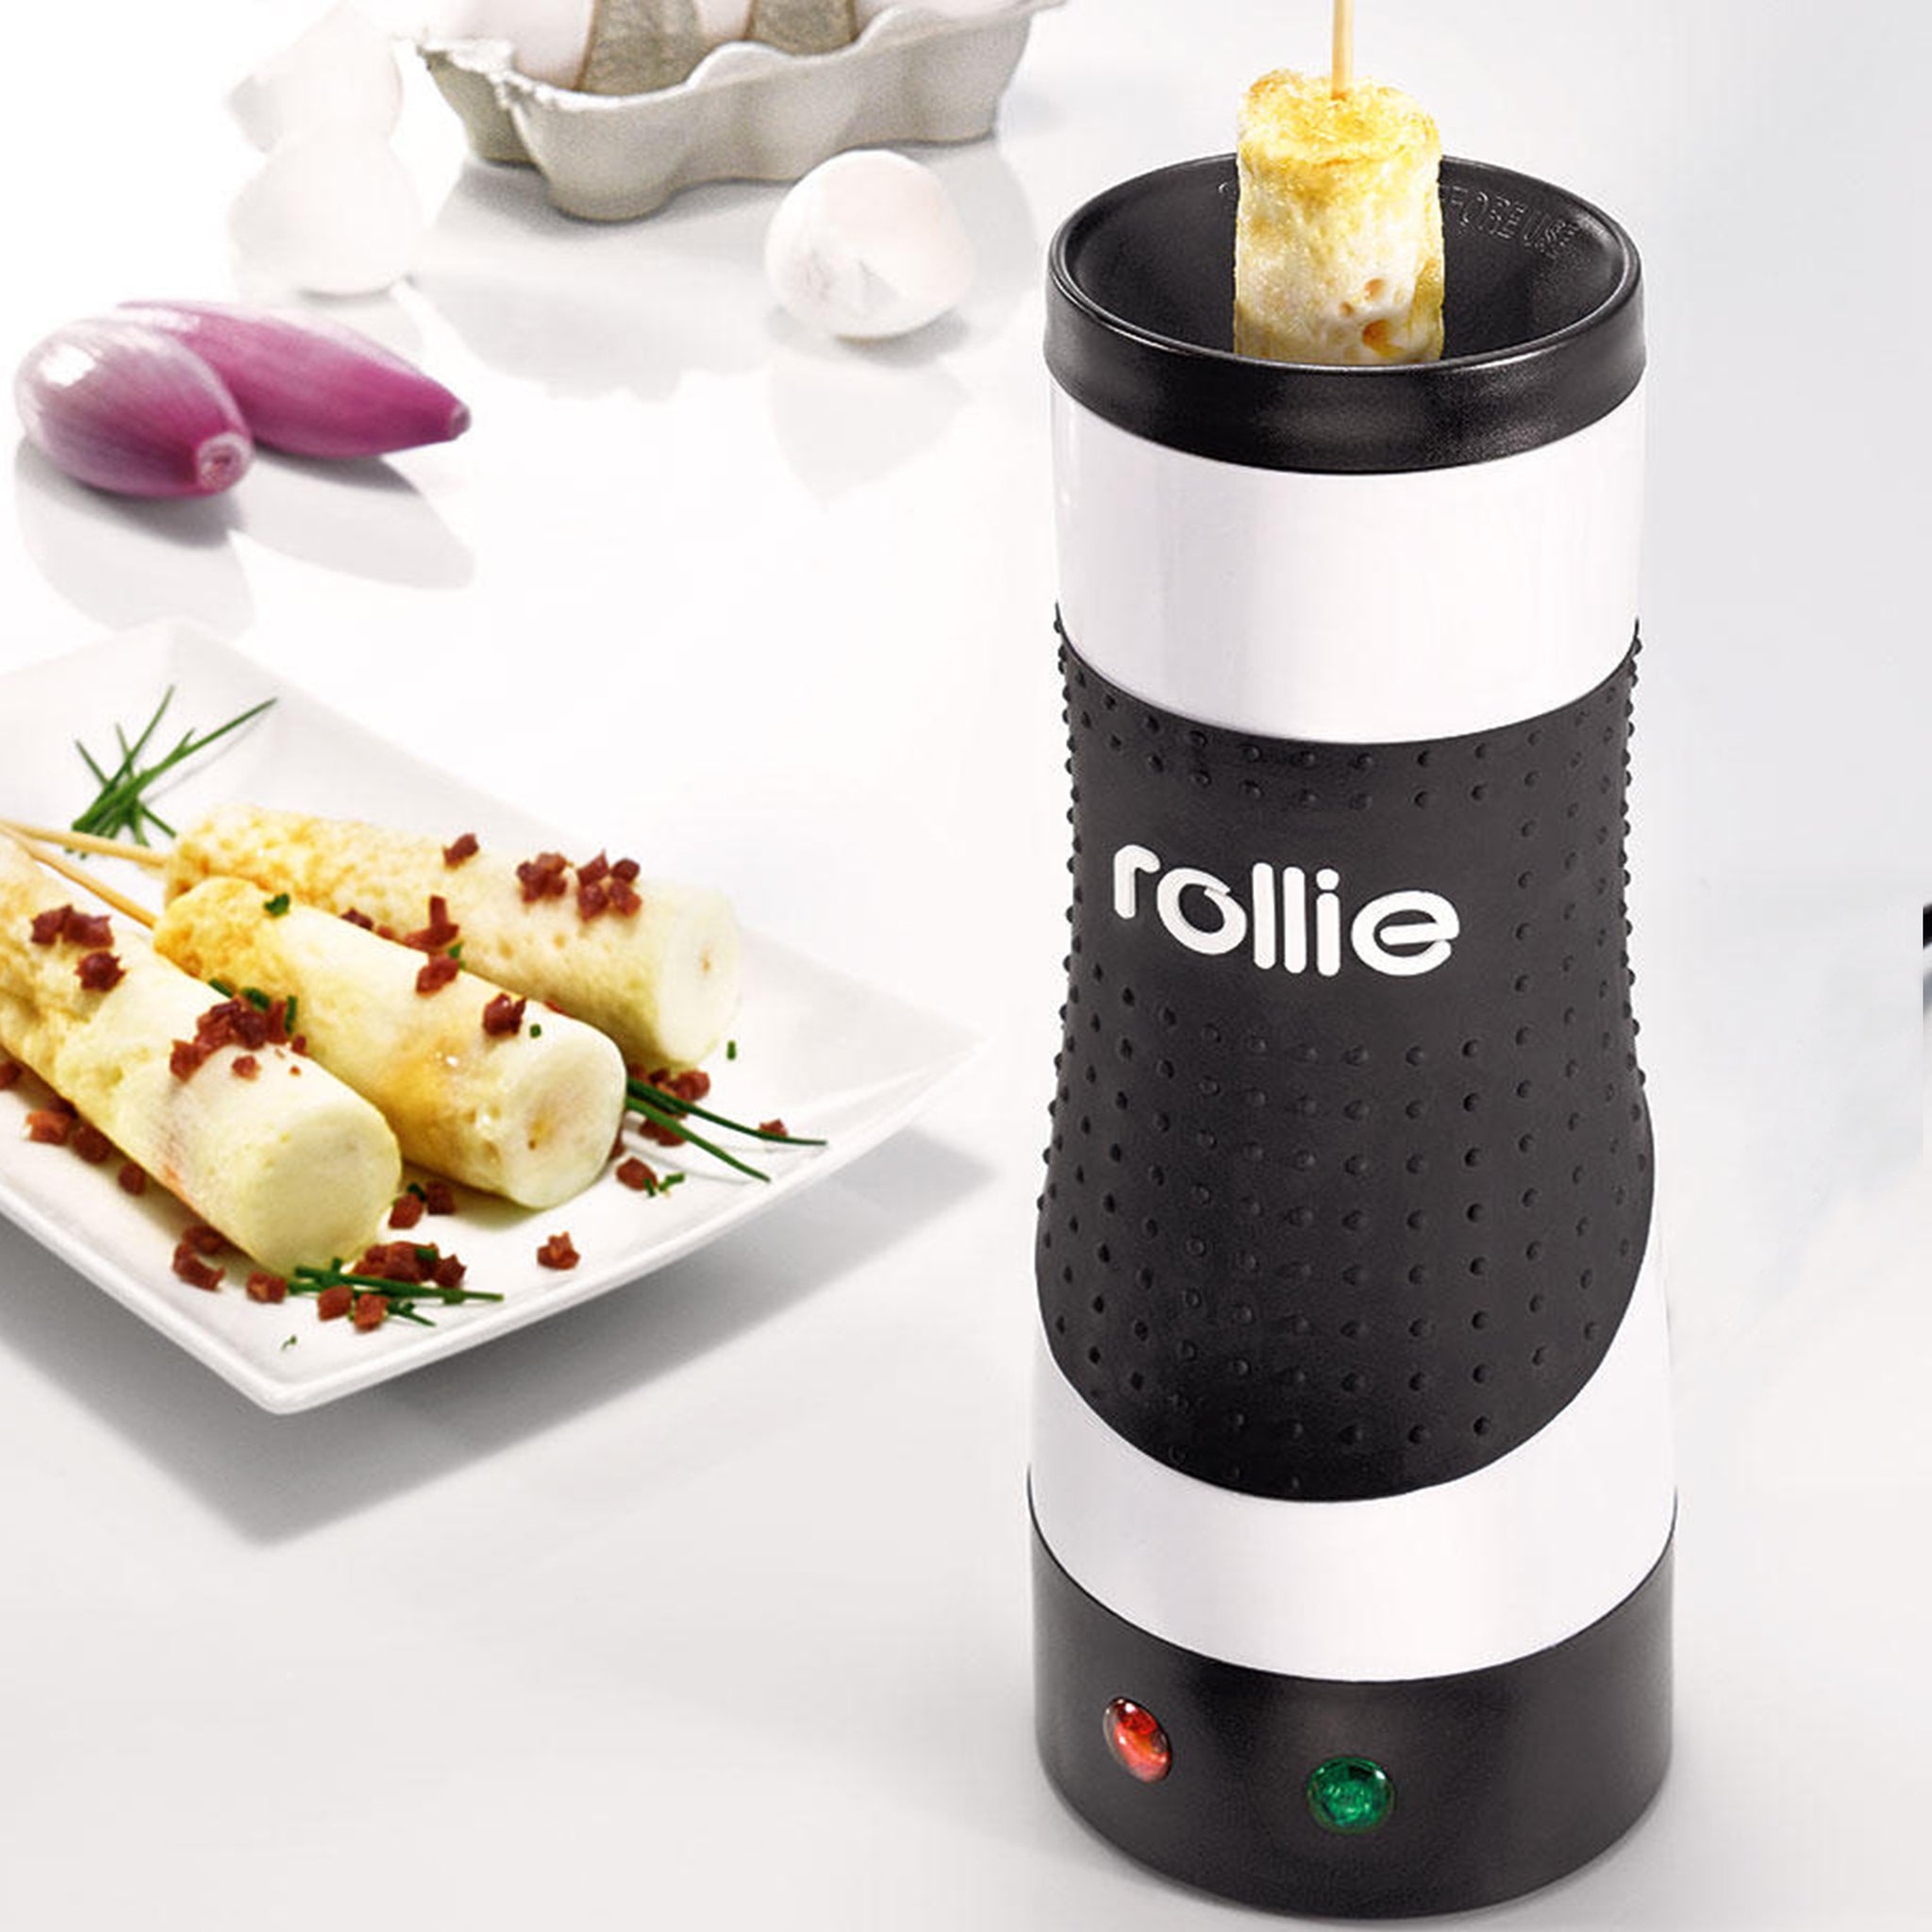 Wirlsweal Electric Automatic Rising Egg Roll Maker with Cleaning